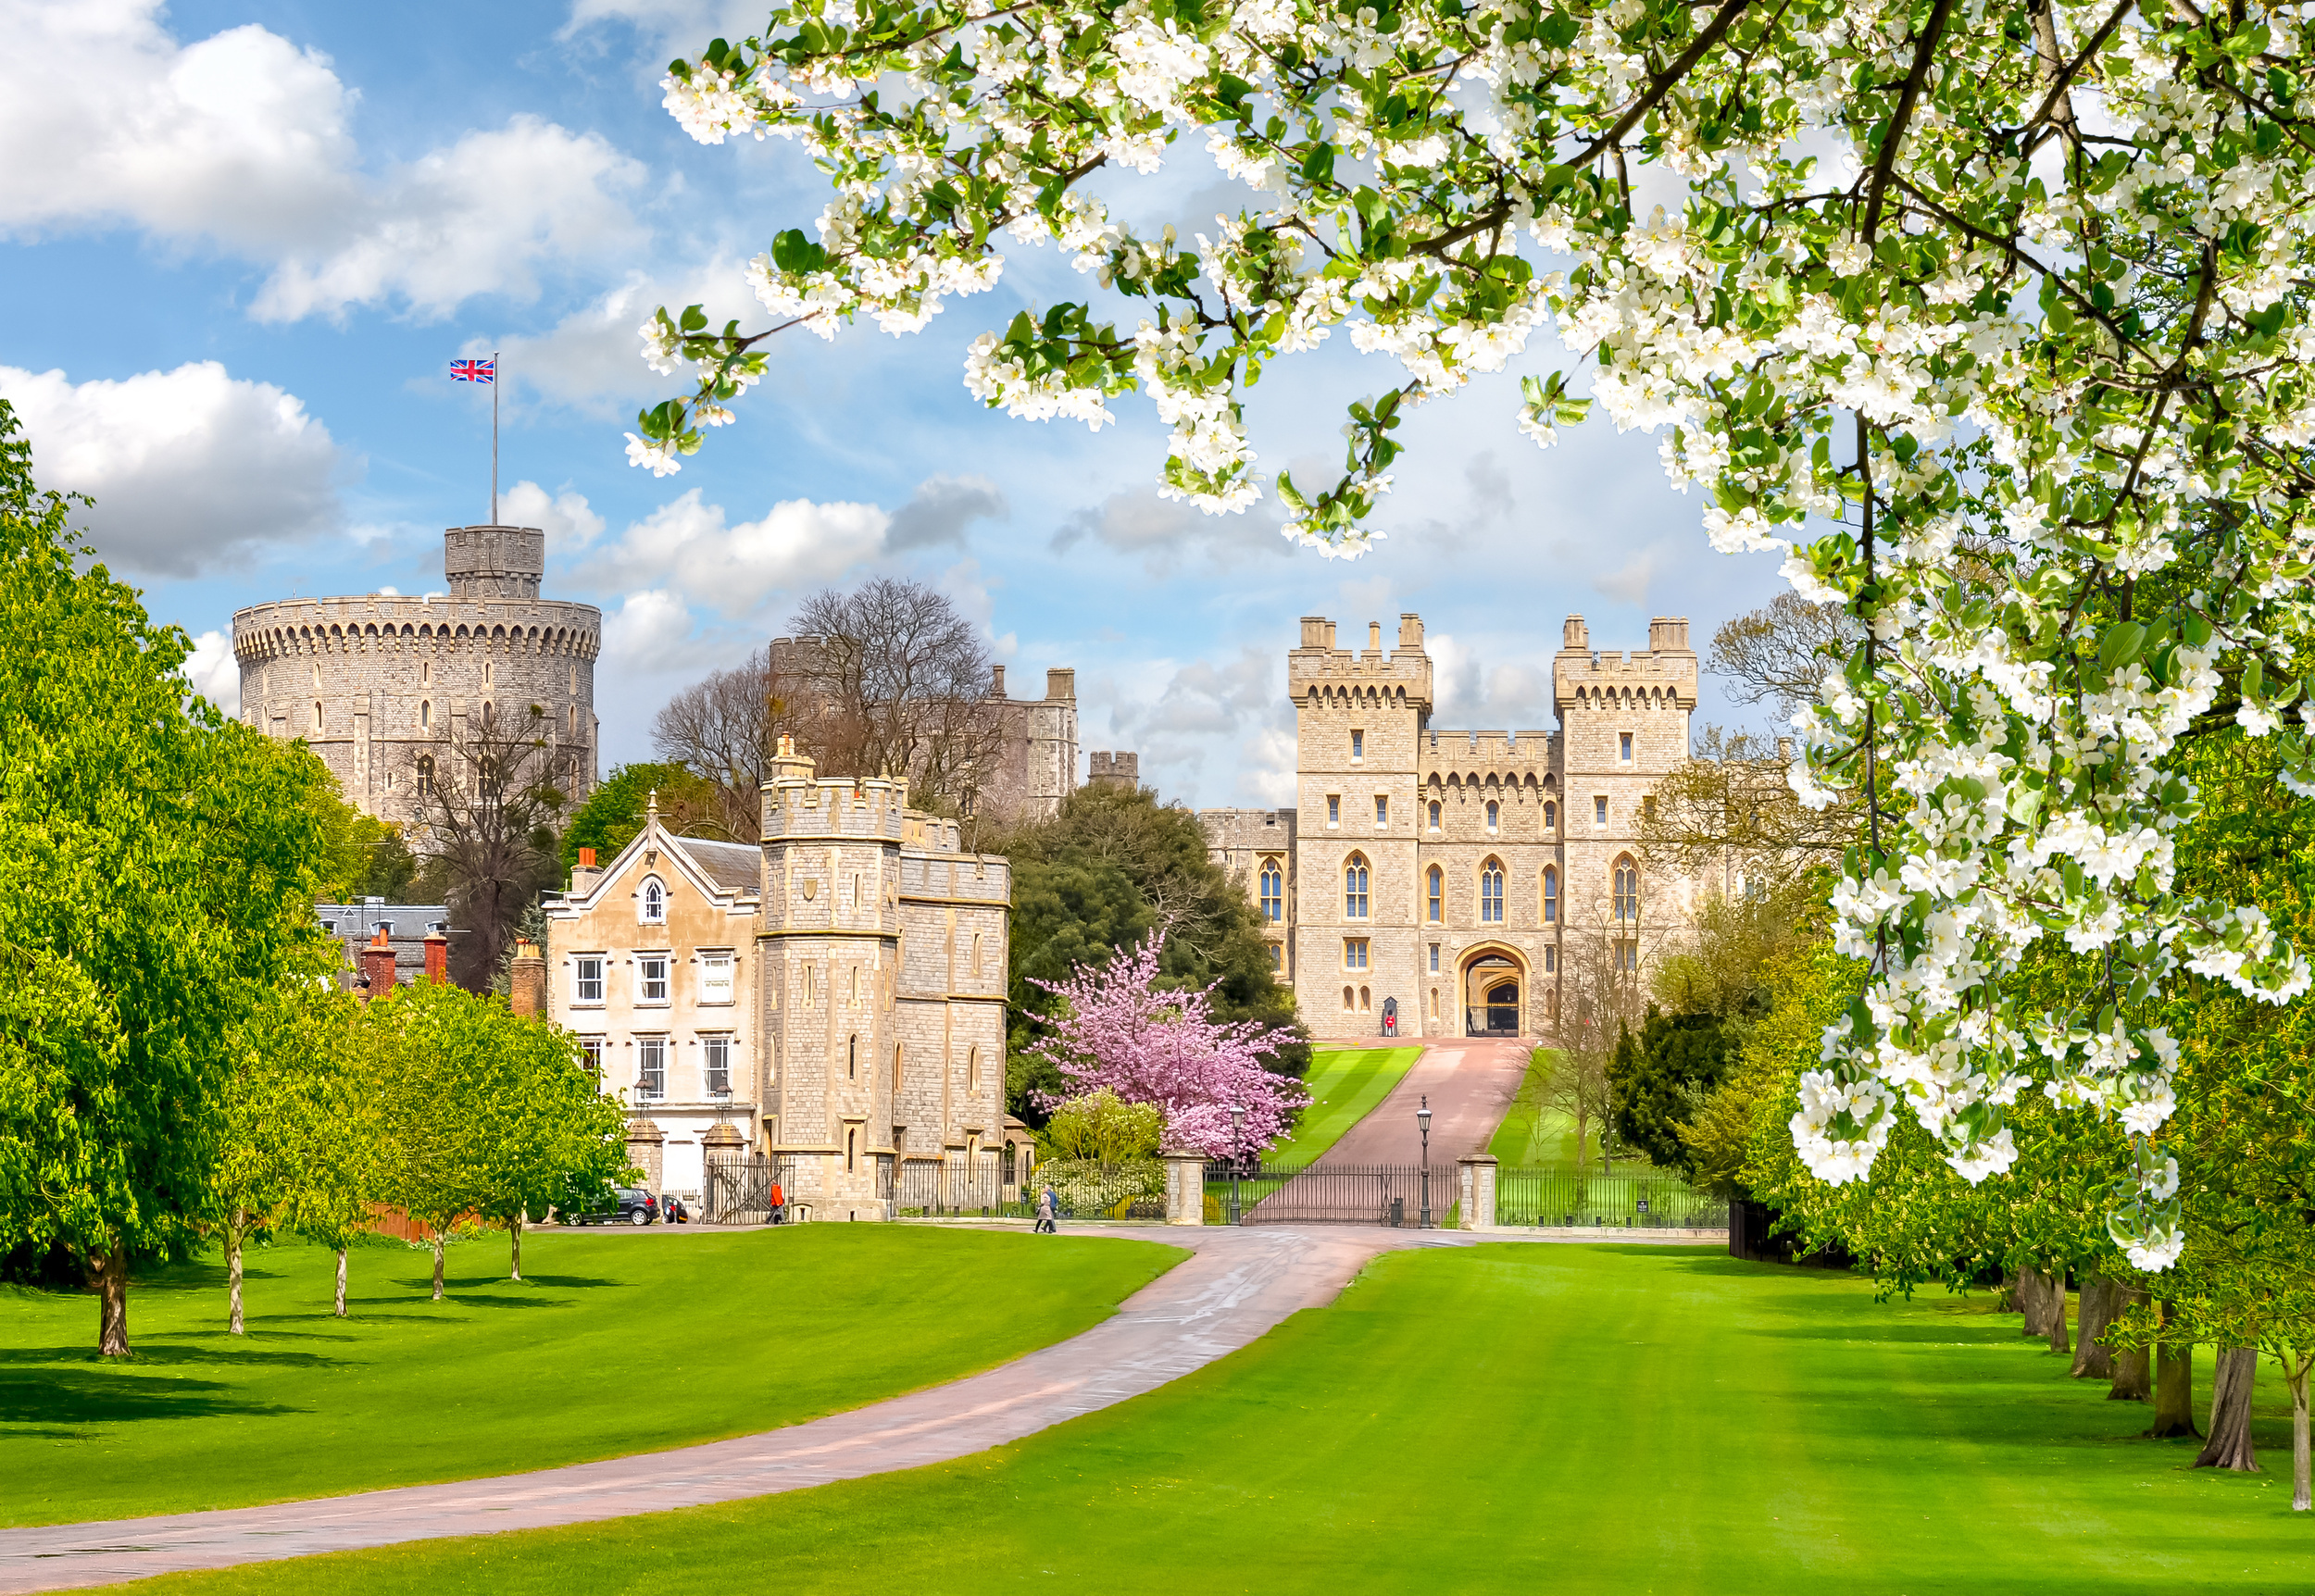 <p>London’s closest castle (after Buckingham Palace, of course) is a quick train ride away from the capital. Take a tour, view the royal artifacts, enjoy the gardens, and explore the surrounding town — a perfect escape from the Big Smoke of the city.</p><p><a href='https://www.msn.com/en-us/community/channel/vid-cj9pqbr0vn9in2b6ddcd8sfgpfq6x6utp44fssrv6mc2gtybw0us'>Follow us on MSN to see more of our exclusive lifestyle content.</a></p>